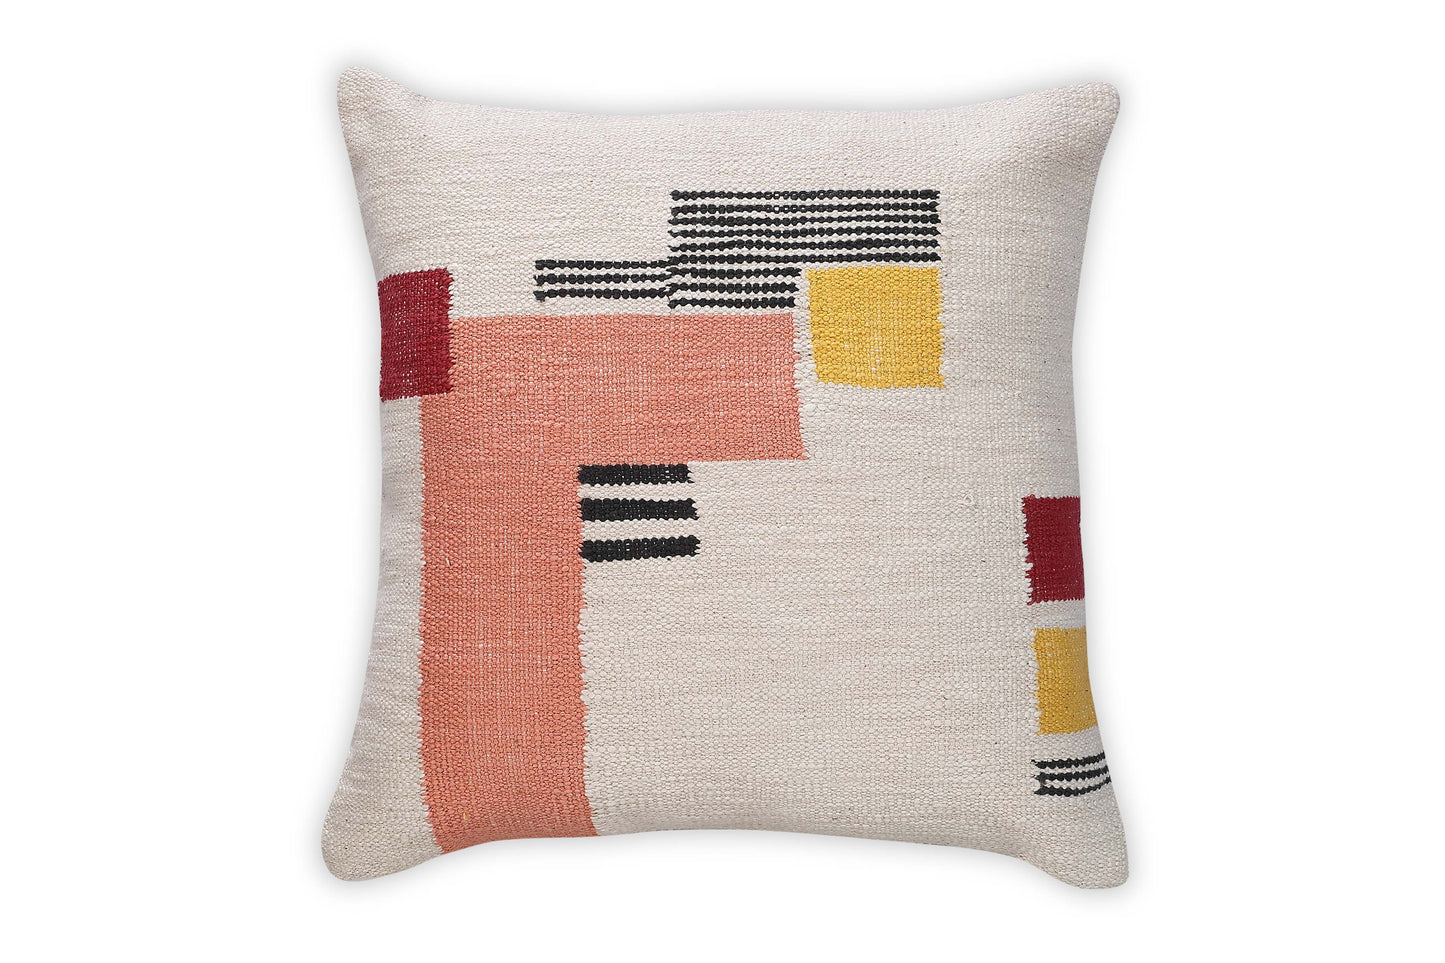 Rani Handwoven Patch Pillow, Pink - 18x18 Inch by The Artisen - Sumiye Co